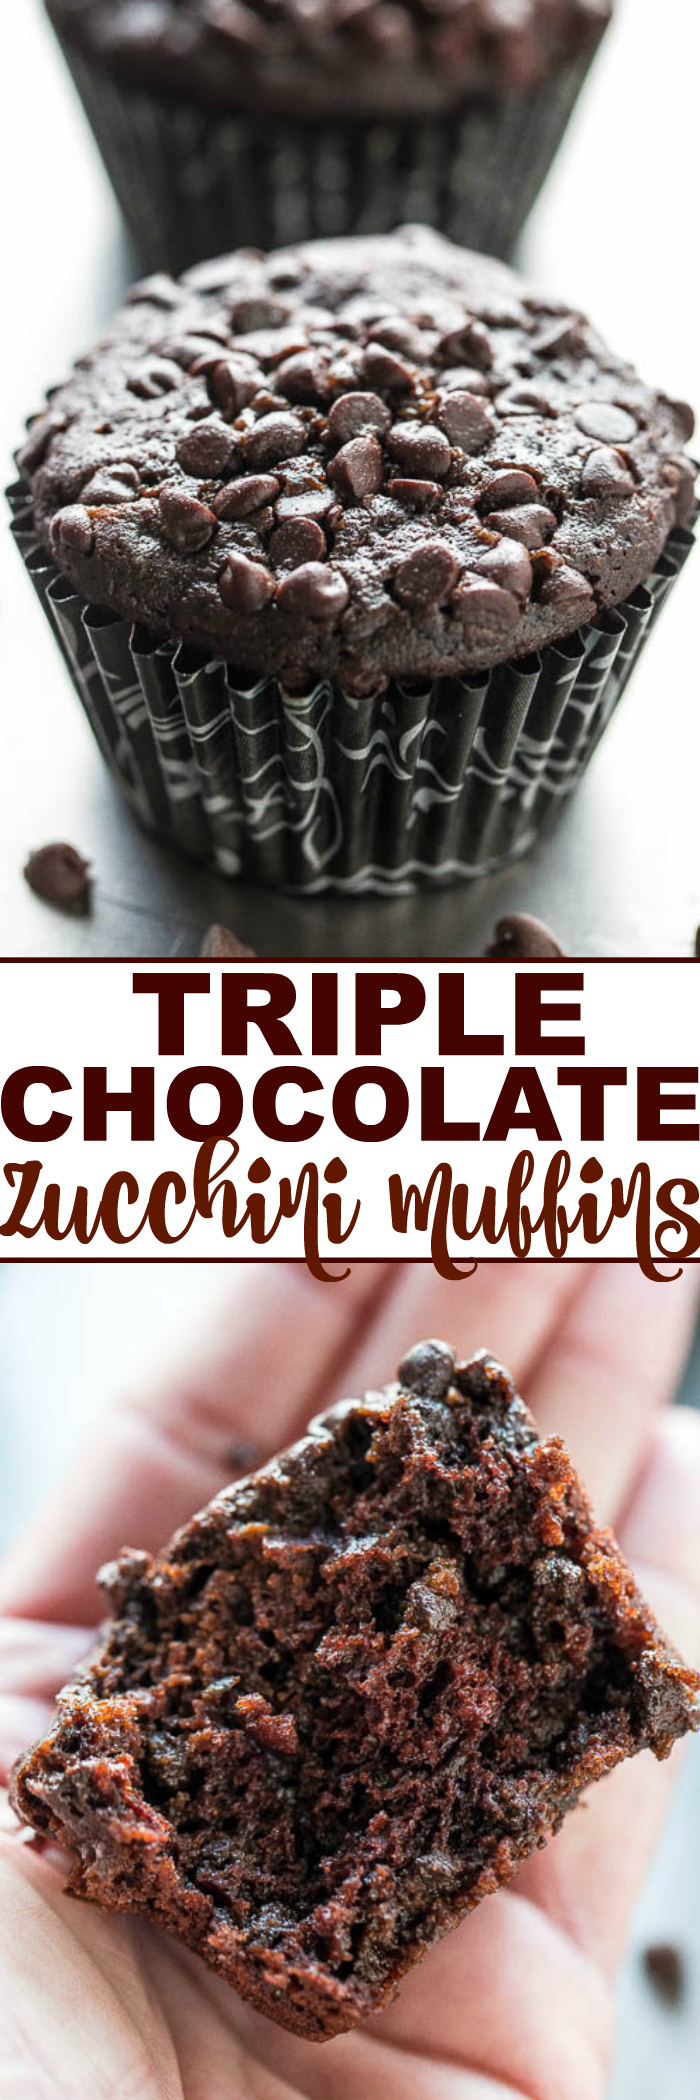 Triple Chocolate Zucchini Muffins - NO dairy or butter and only 1/4 cup oil in the entire batch!! Promise you CANNOT taste the zucchini but it keeps the muffins so soft and moist! Love sneaking in extra veggies with lots of CHOCOLATE!!